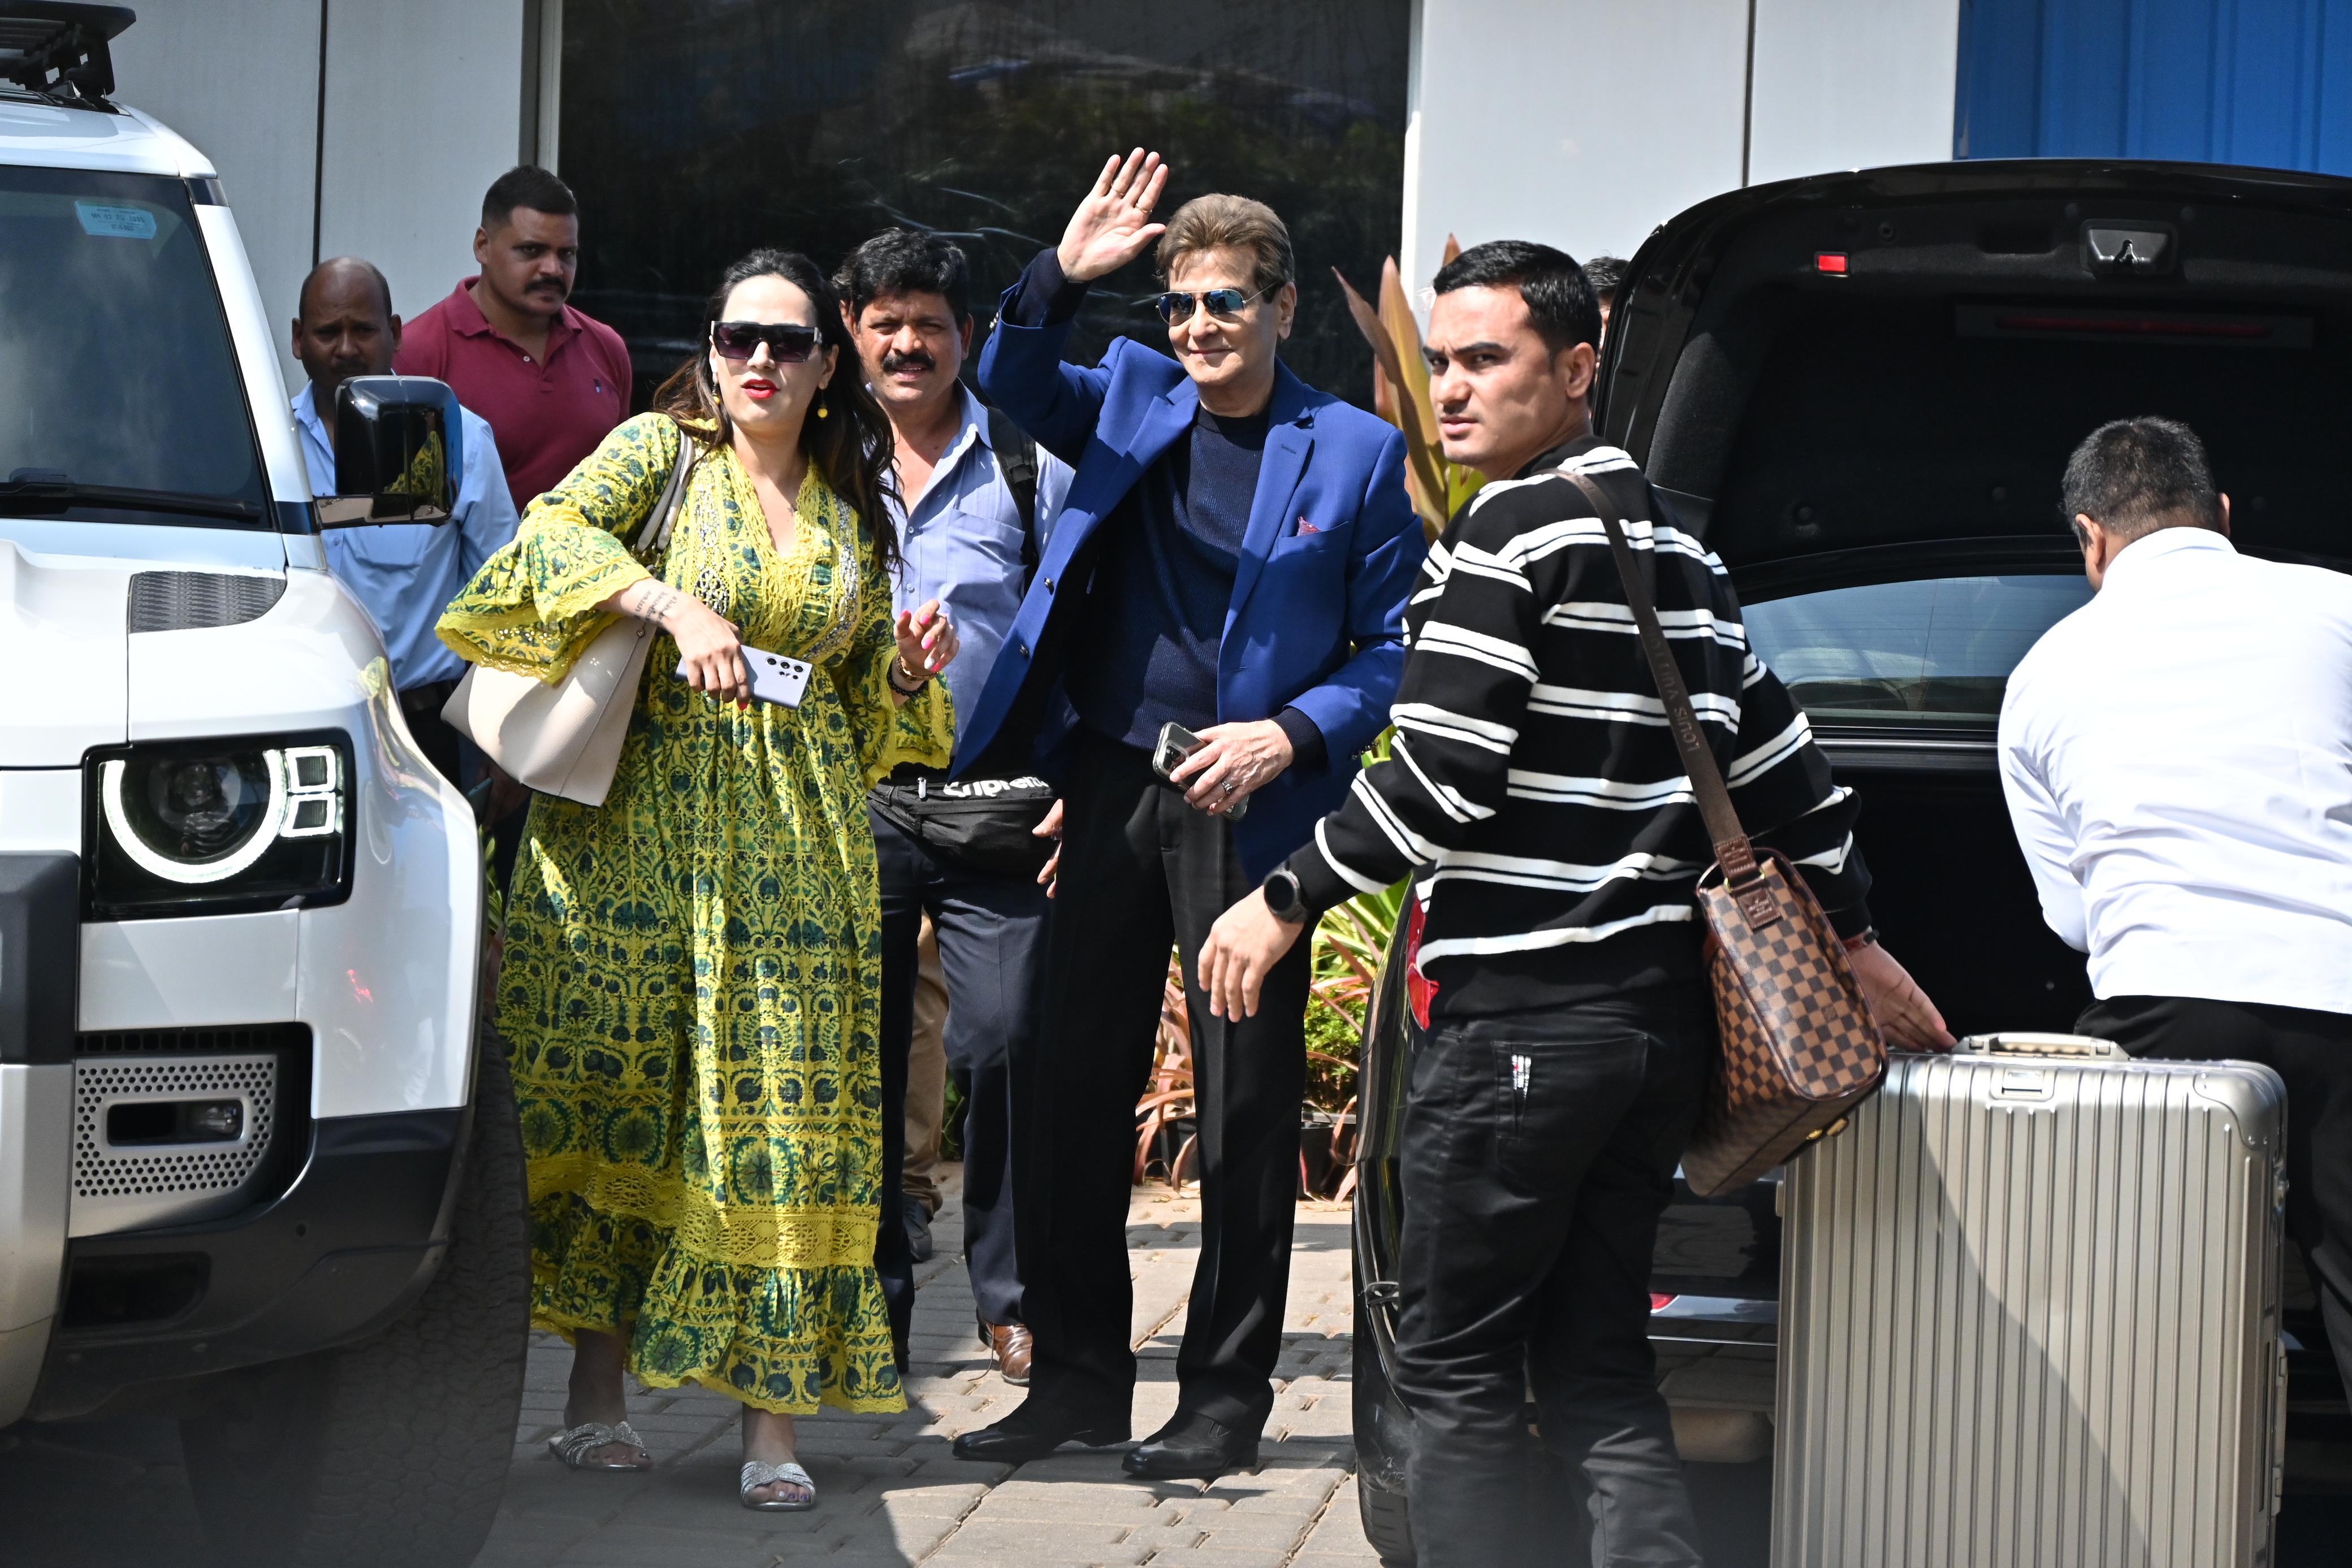 Veteran actor Jeetendra got clicked at Kalina airport as he jetted off for Jamnagar